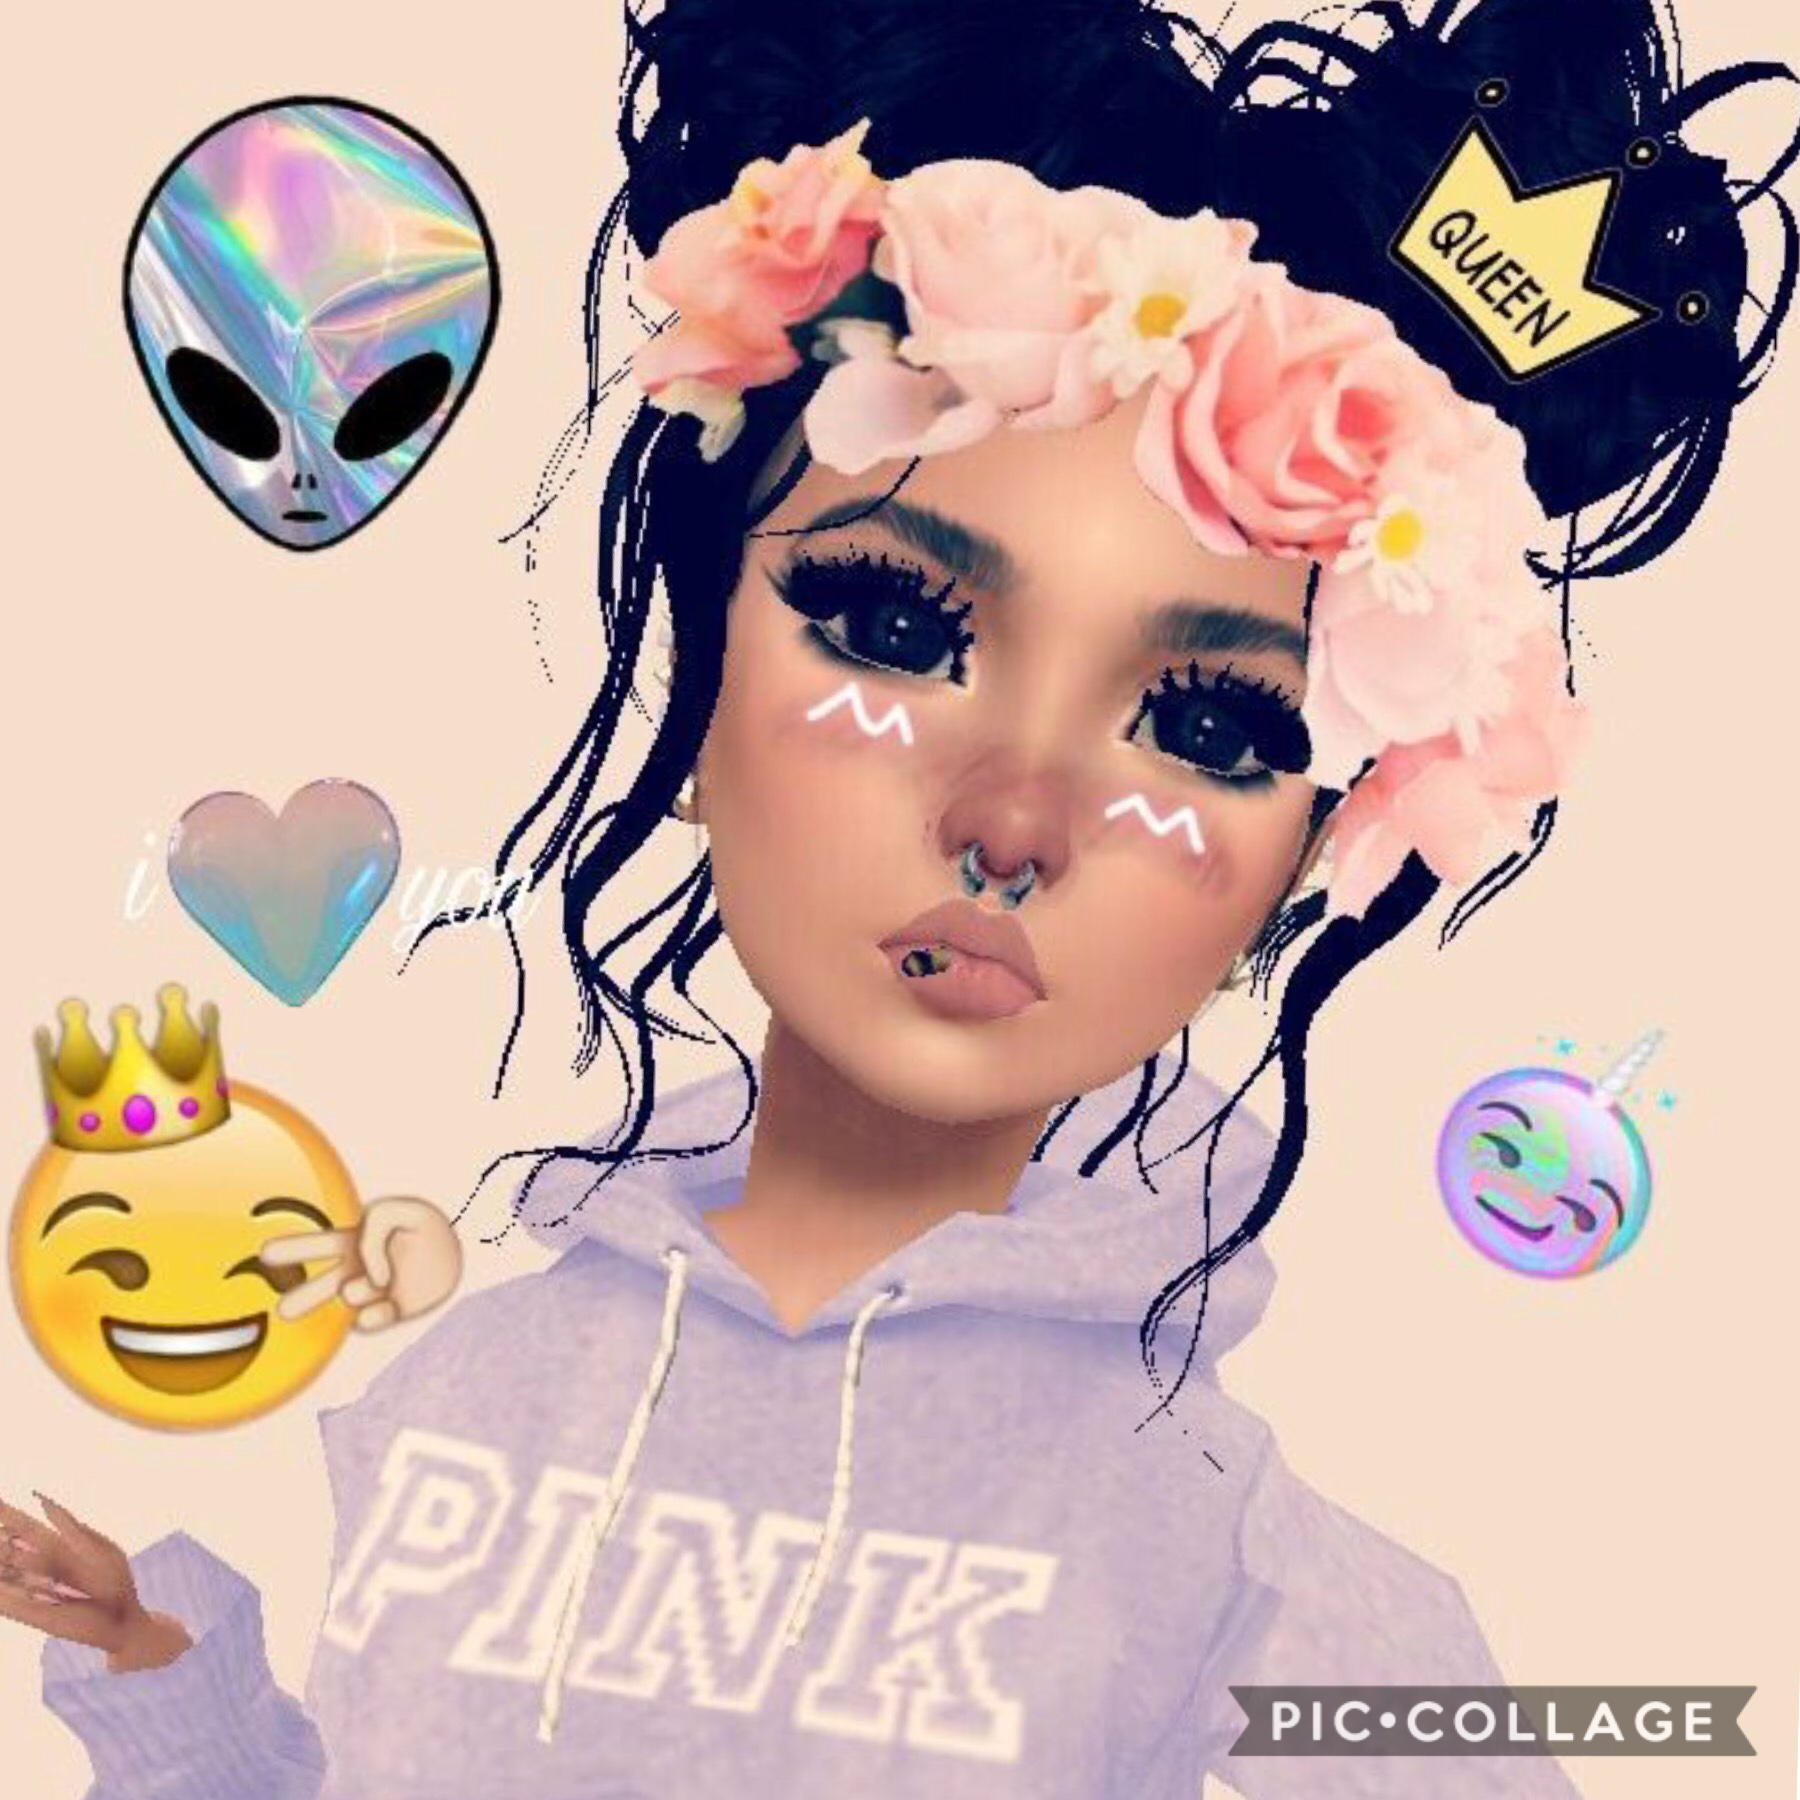 My imvu person and i got to more